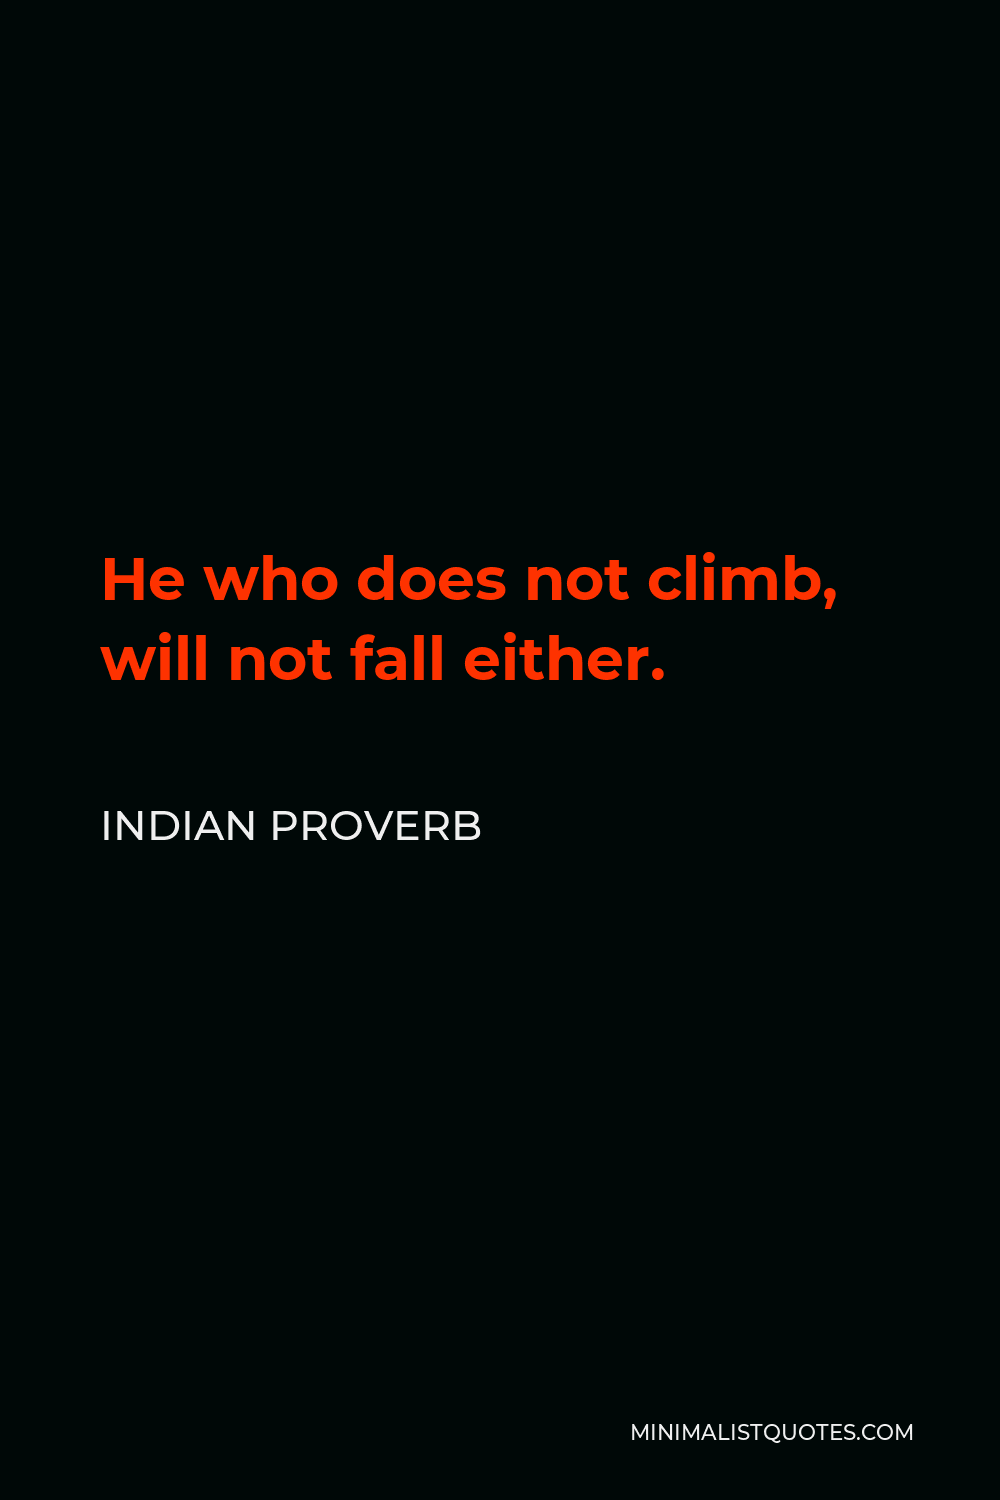 Indian Proverb Quote - He who does not climb, will not fall either.